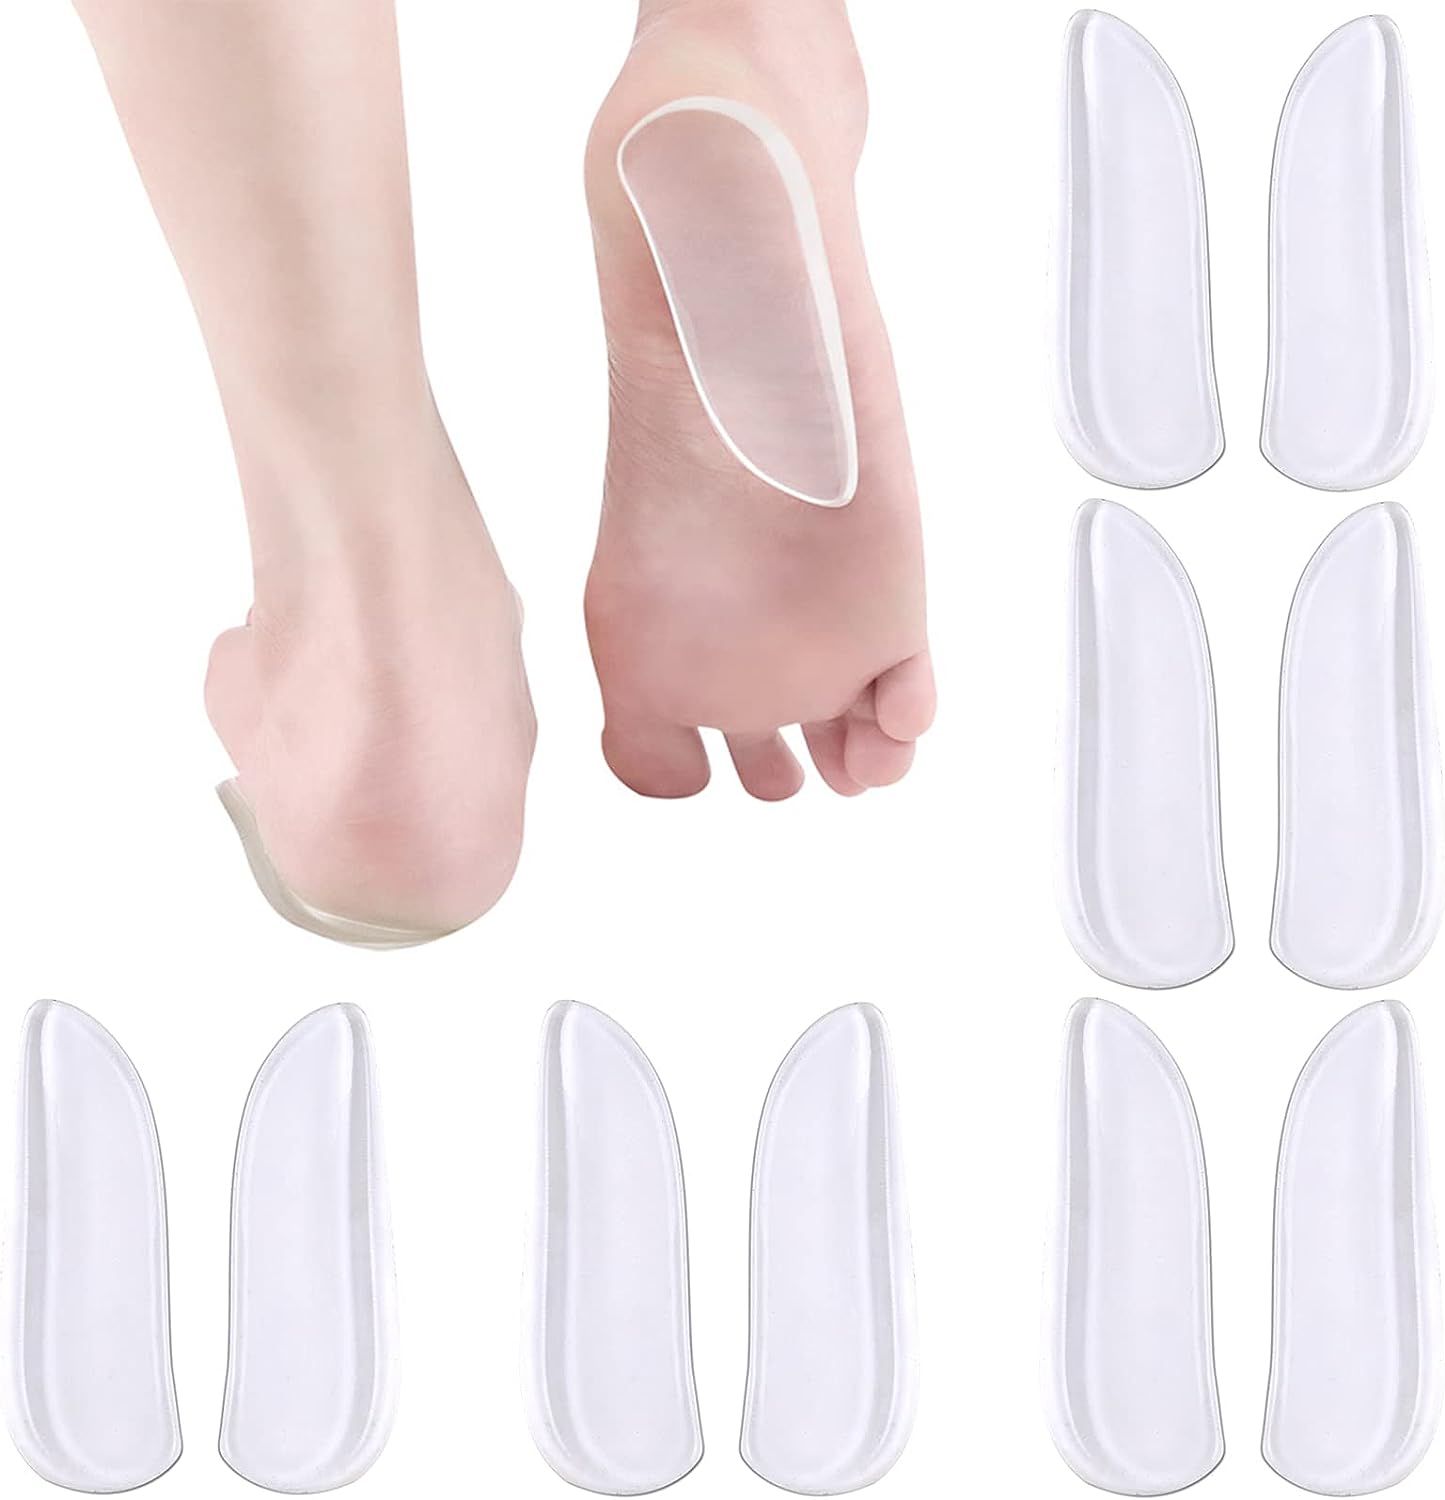 5 Pairs Medial & Lateral Heel Wedge Silicone Insoles - [...]